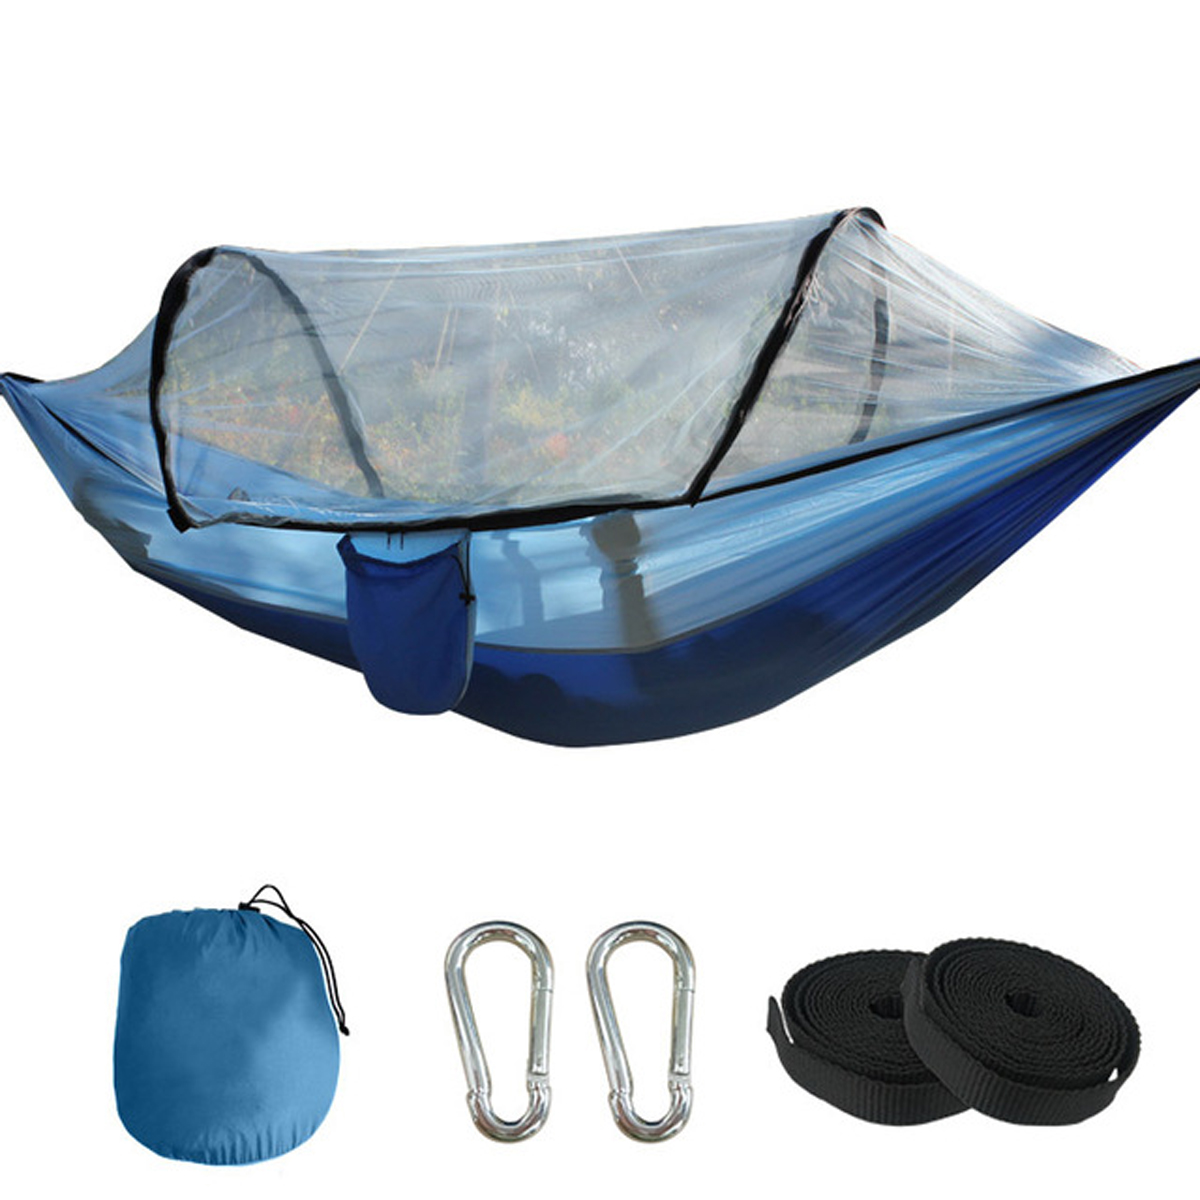 1-2-People-Camping-Hammock-with-Mosquito-Net-Lightweight-Hanging-Bed-Beach-Travel-Max-Load-300kg-1697049-2